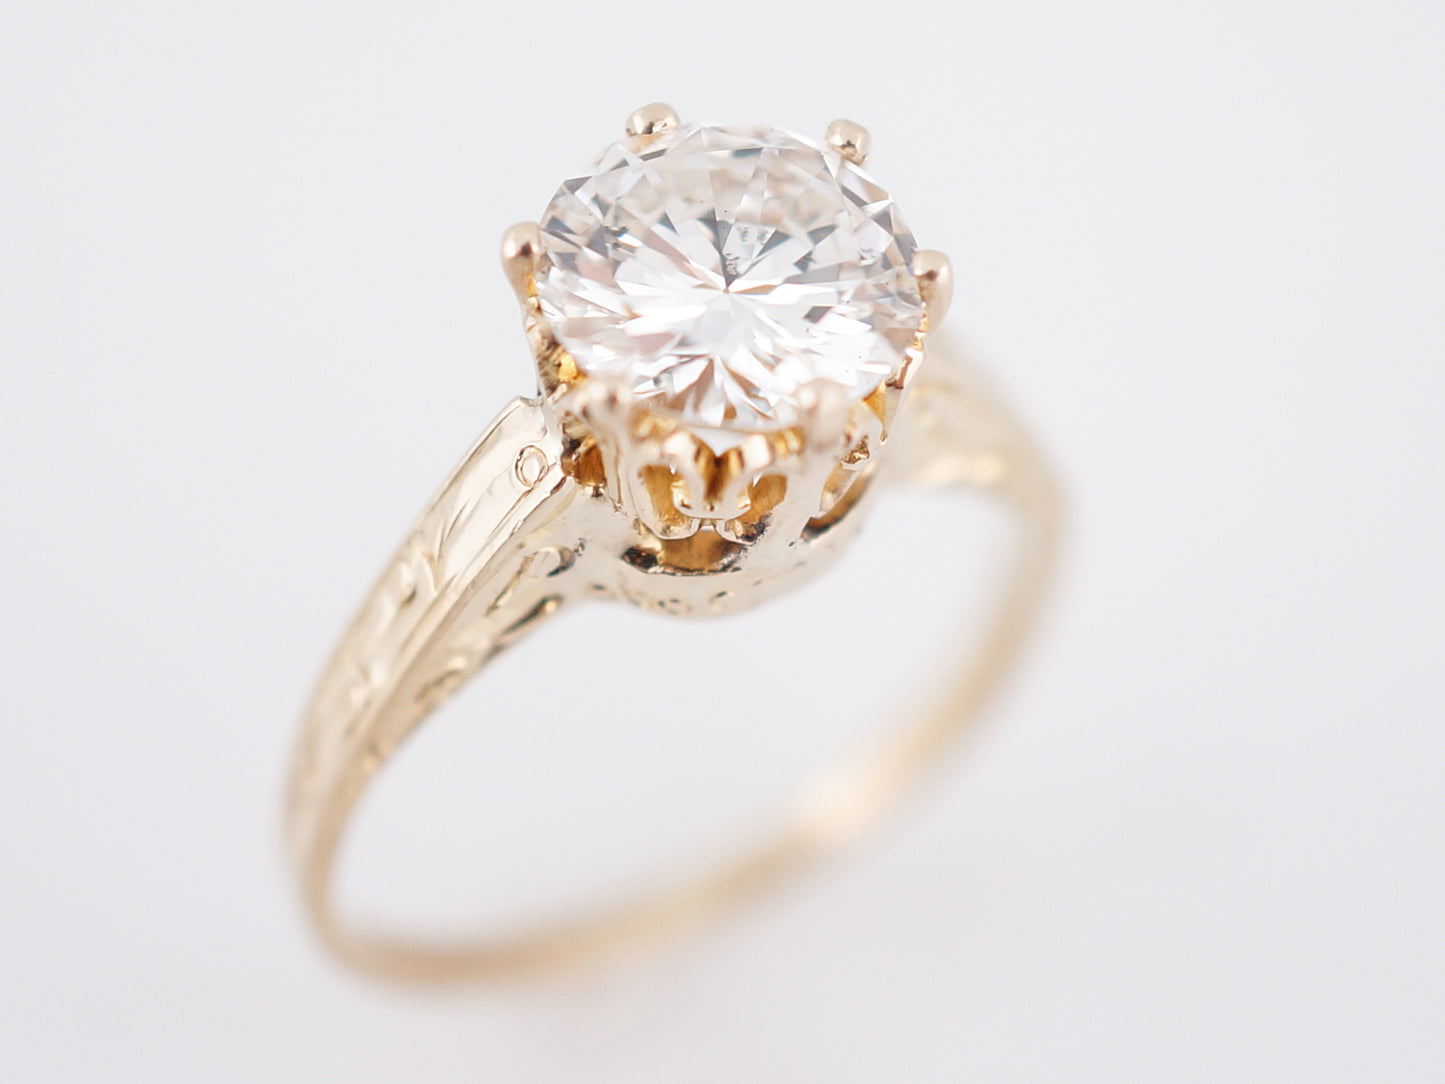 Antique Engagement Ring Victorian 1.22 Round Brilliant Cut Diamond in 14k Yellow Gold